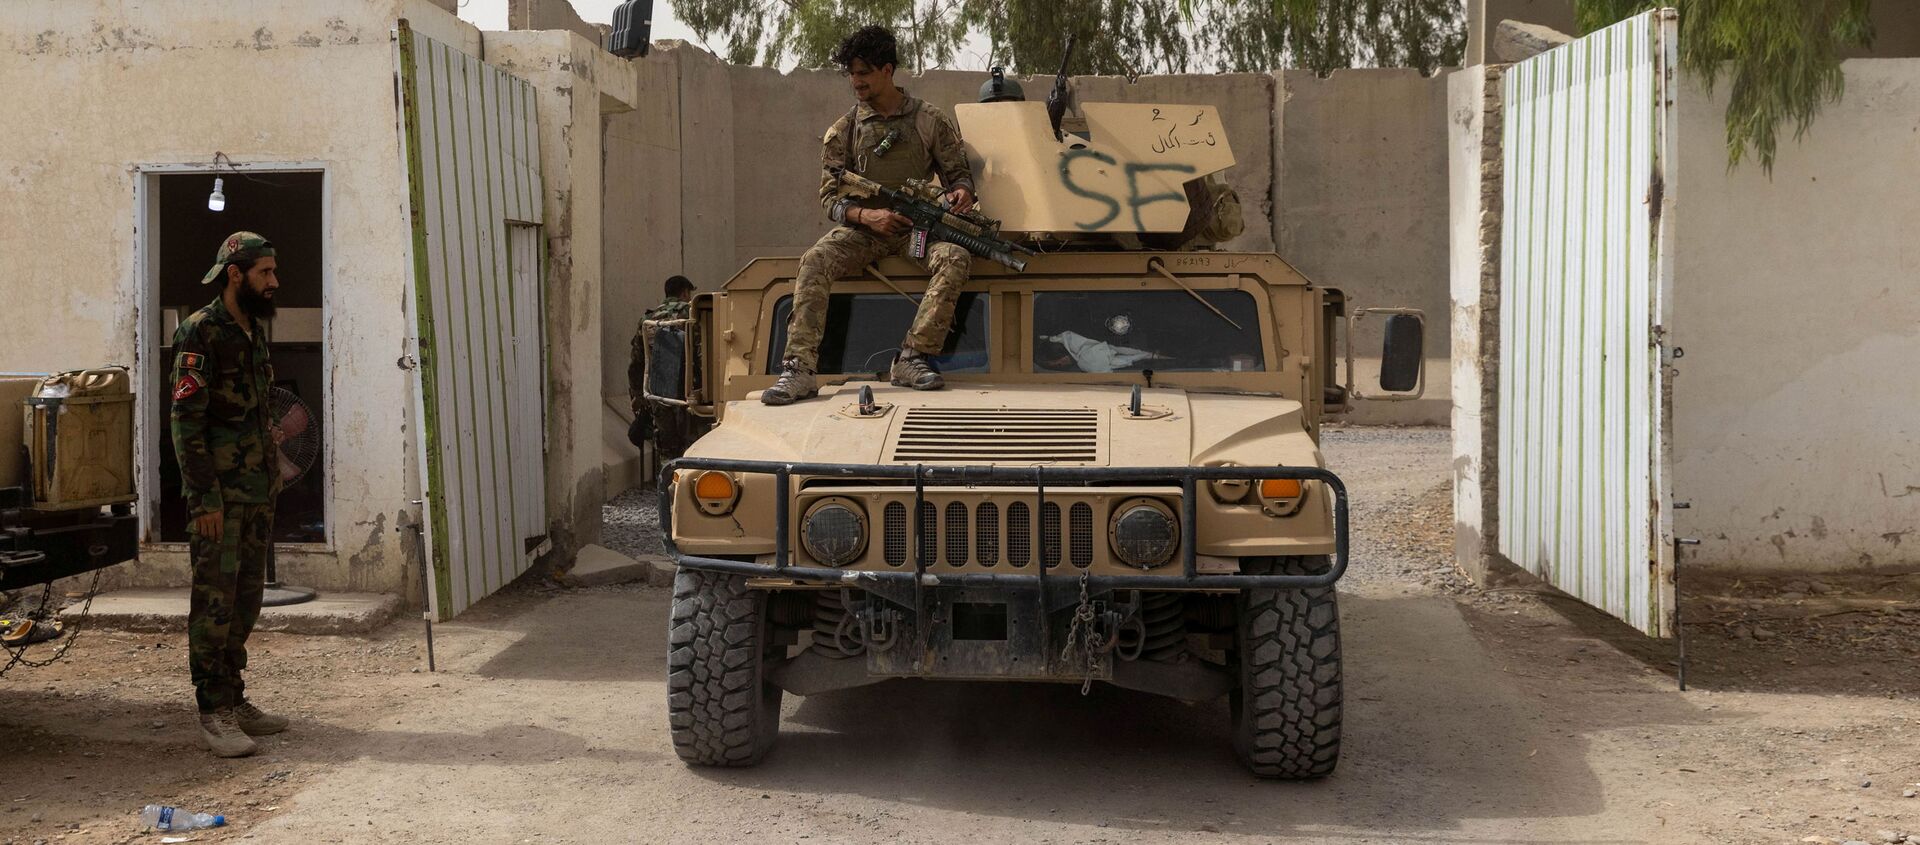 A member of Afghan Special Forces sits on the rooftop of his humvee as he arrives at the base after heavy clashes with Taliban during the rescue mission of a policeman besieged at a check post, in Kandahar province, Afghanistan, July 13, 2021. REUTERS/Danish Siddiqui - Sputnik International, 1920, 13.07.2021